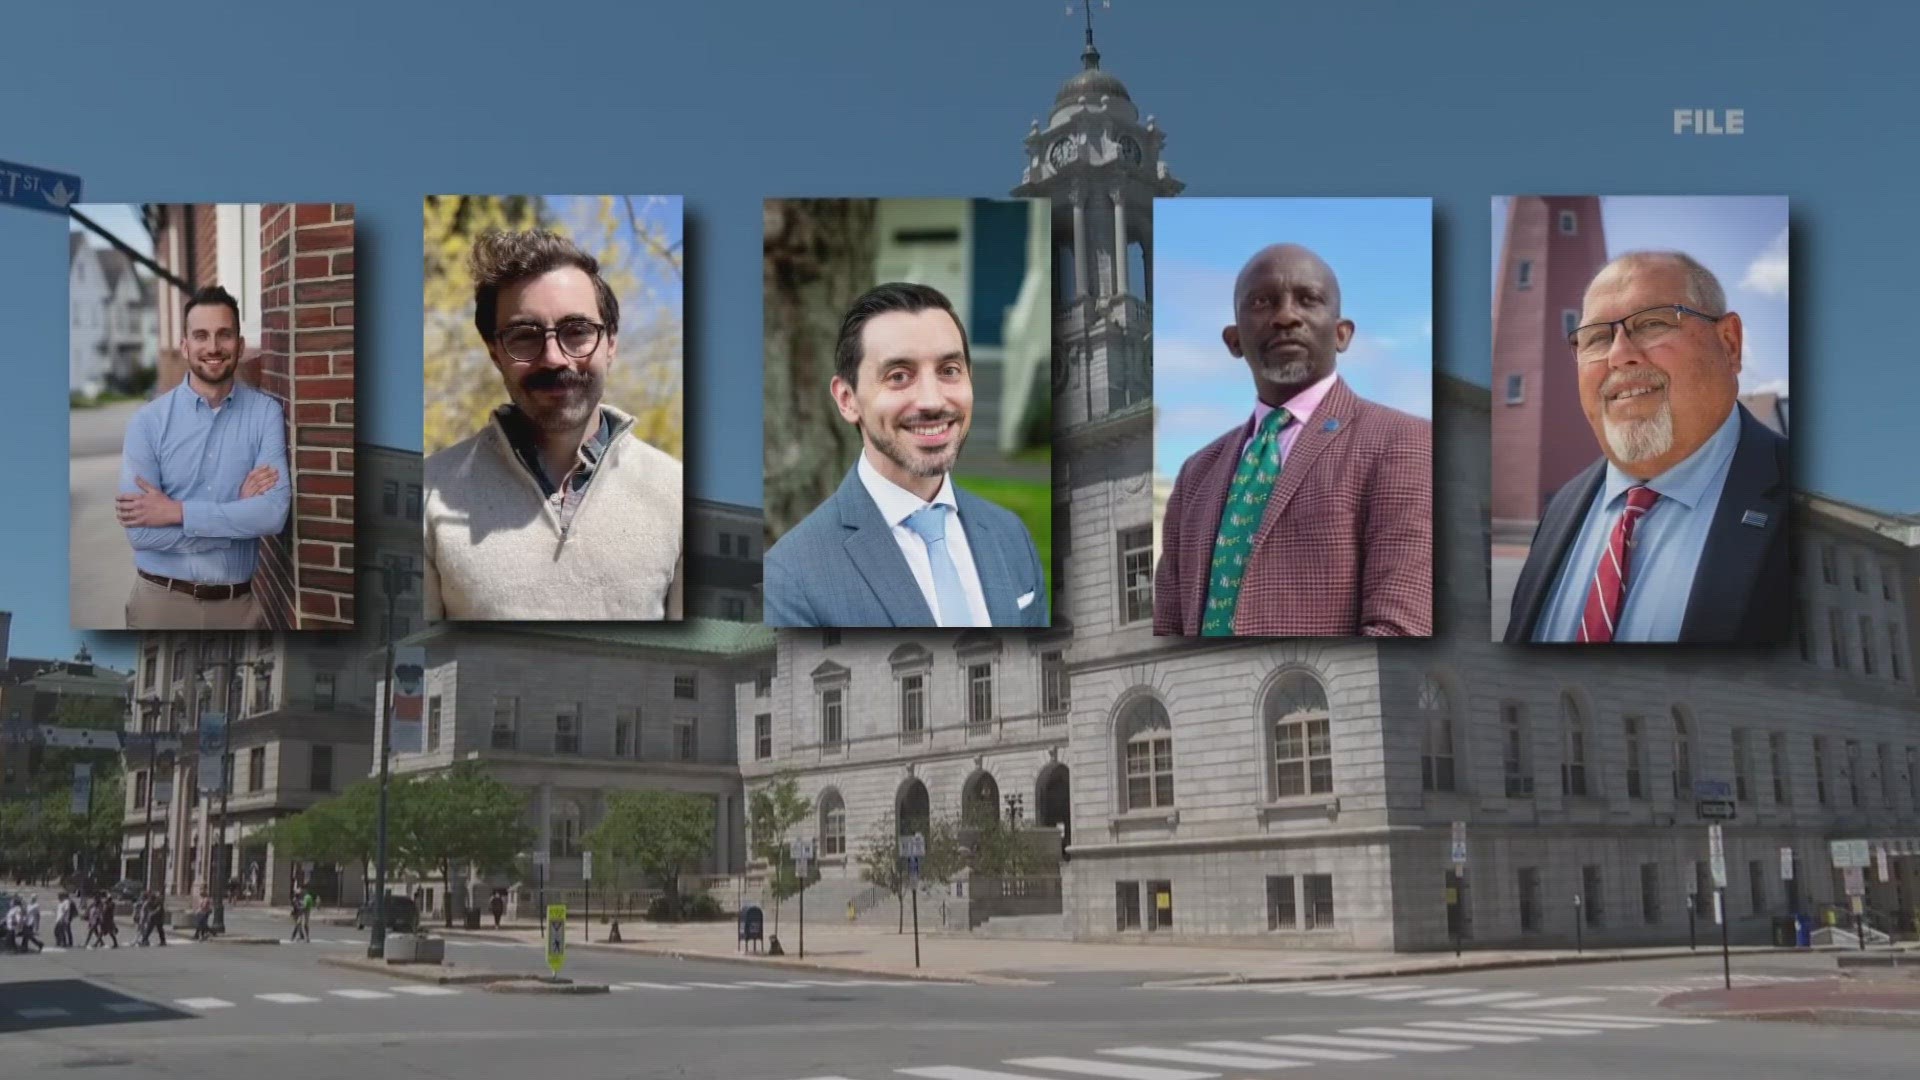 Five candidates, with most having previous and current experience on the city council, are running for the seat currently held by Kate Snyder.